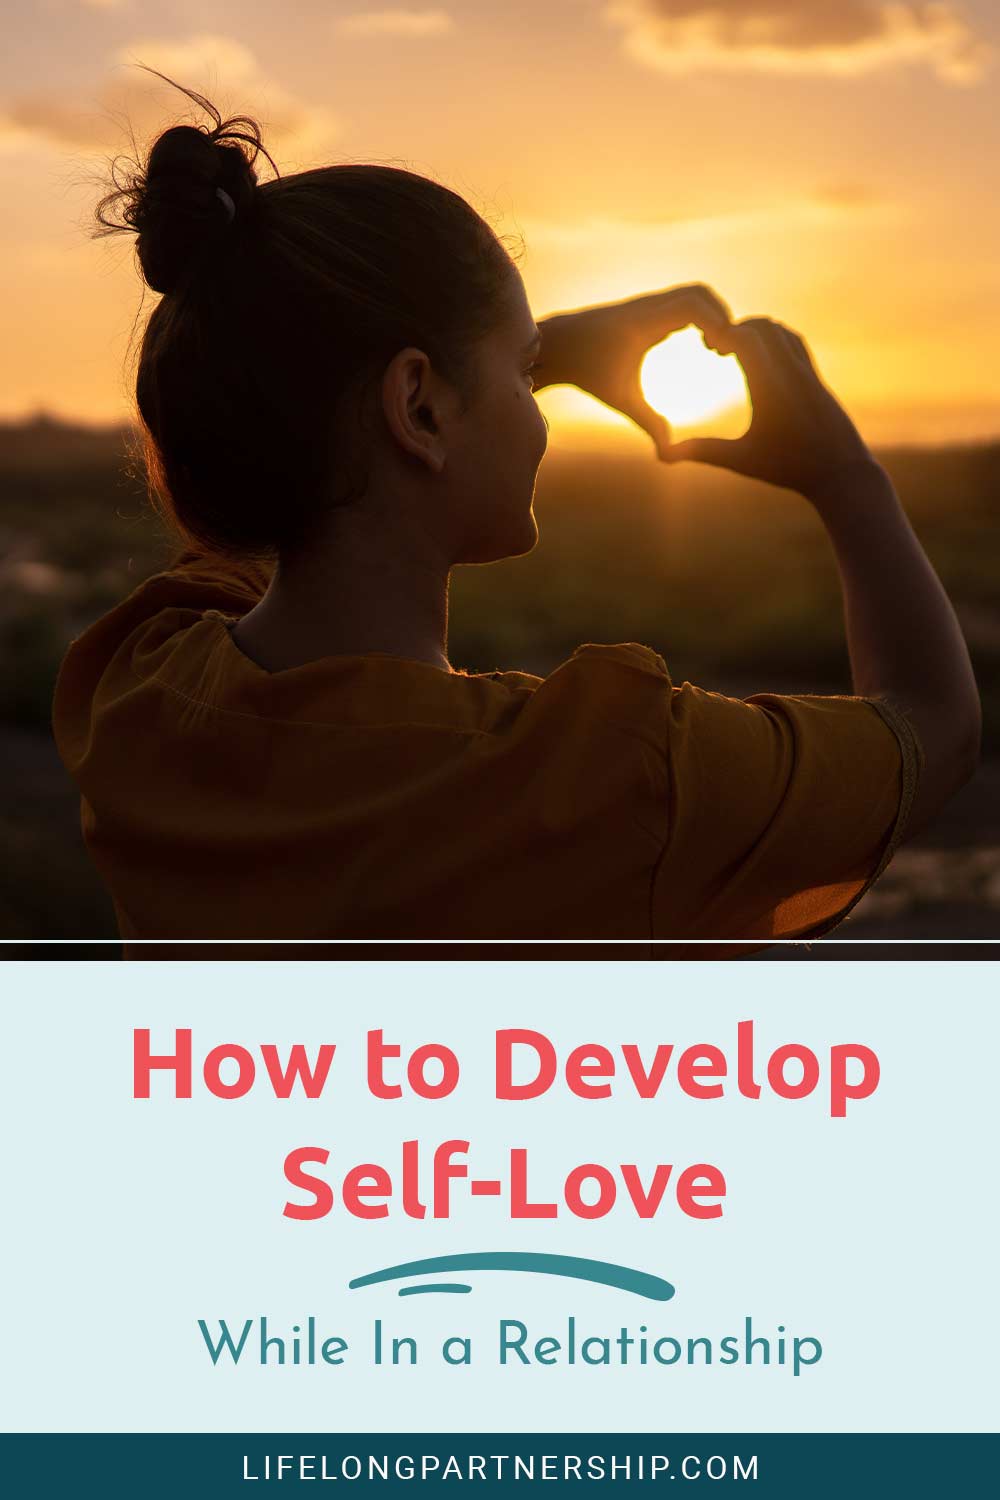 How to Develop Self-Love While In a Relationship